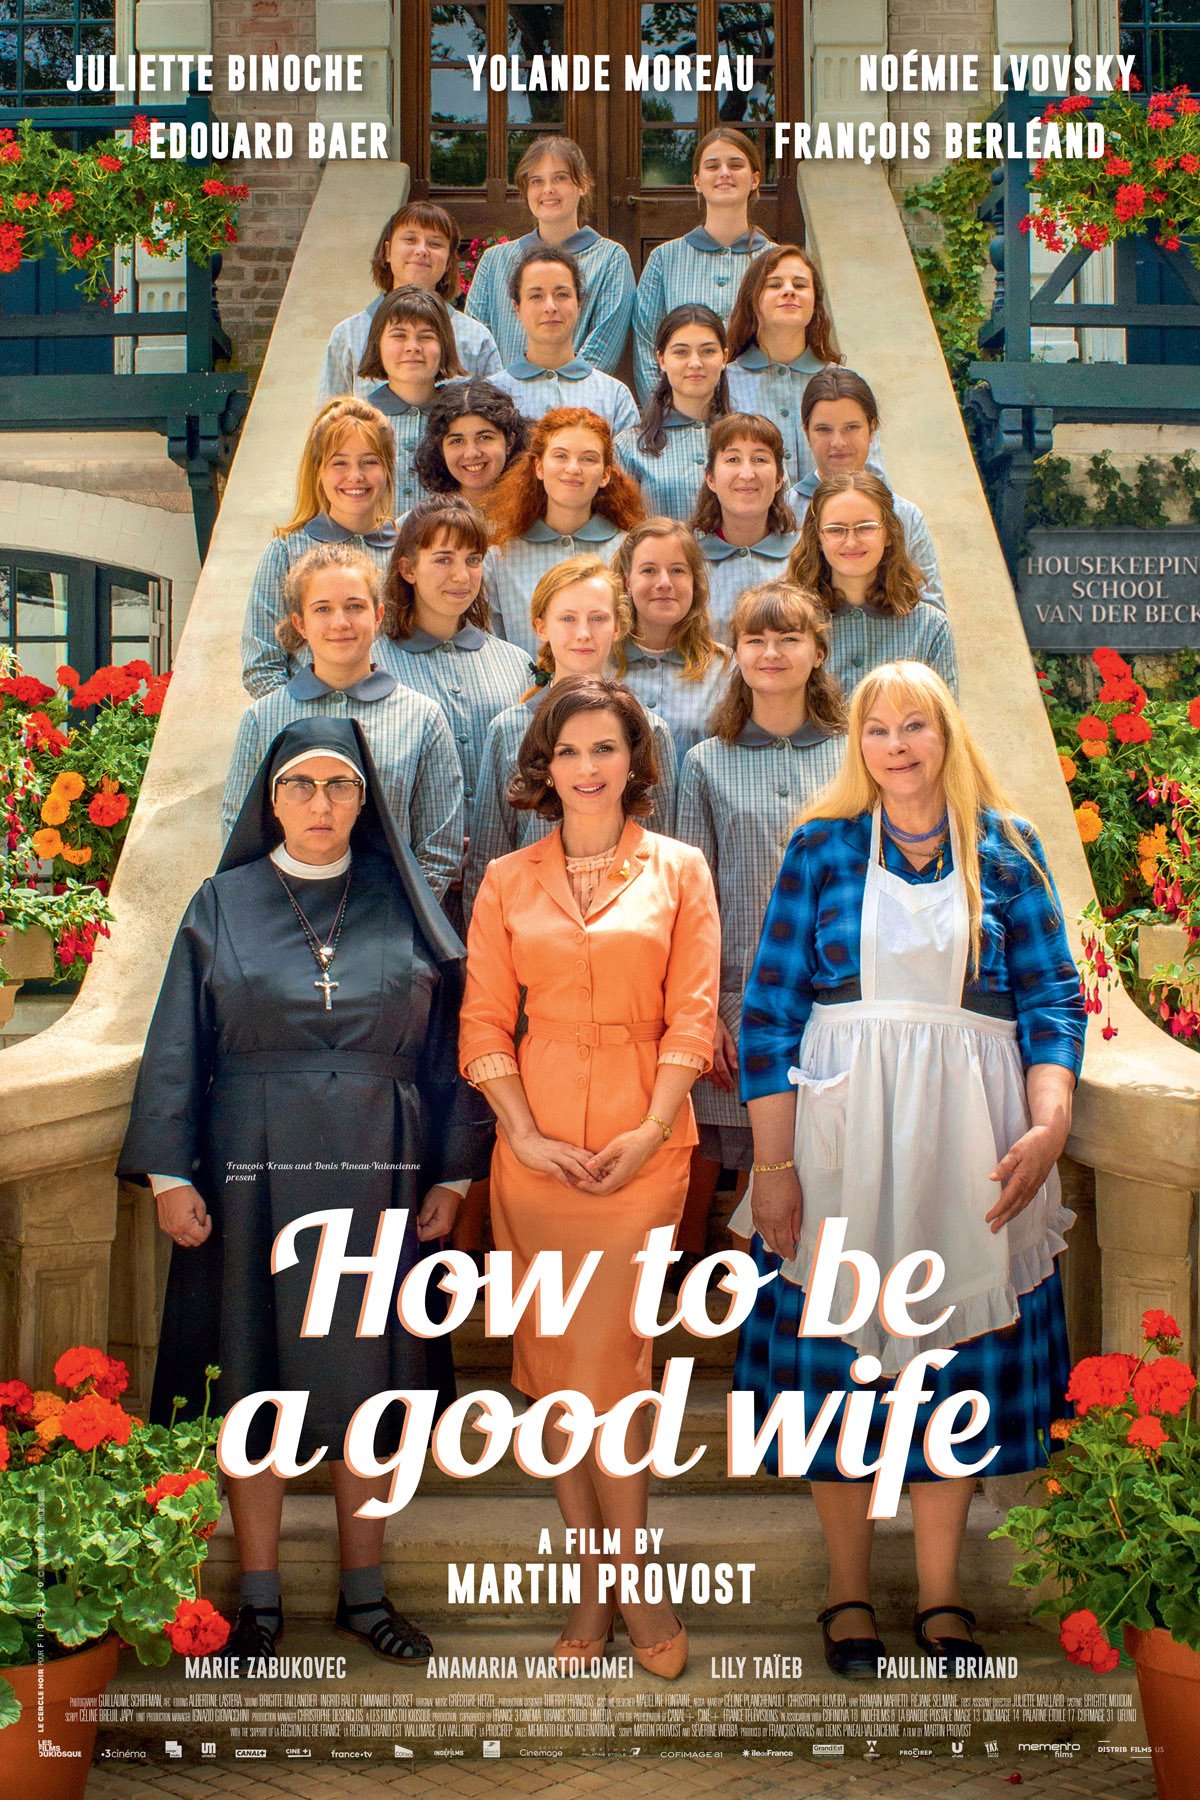 Film Fest presents 'How to Be a Good Wife' premiere May 19-25